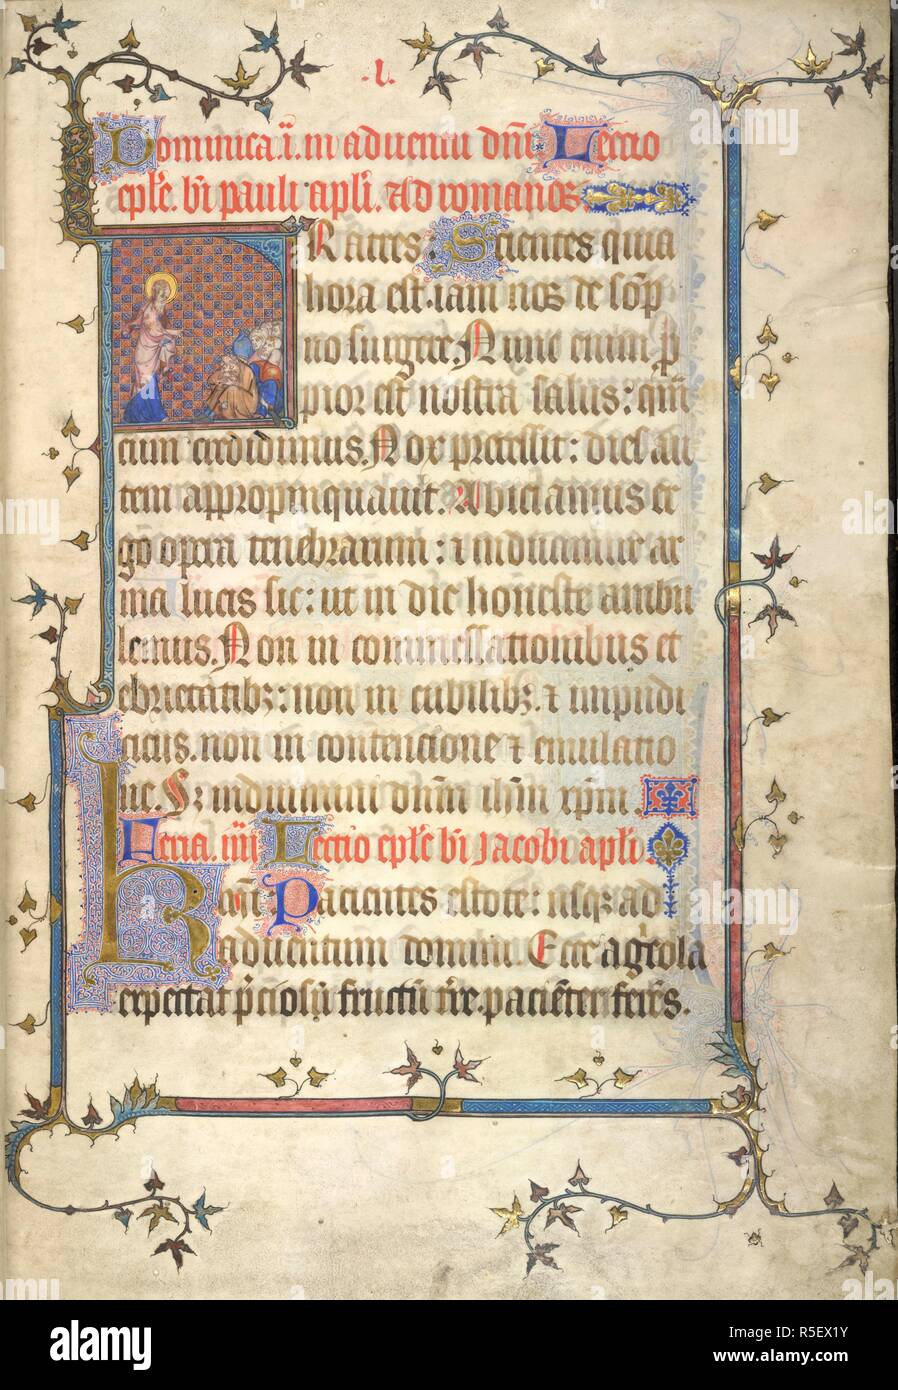 Historiated initial 'F'(ratres) of Paul preaching to the Romans, with a full bar border, at the reading for the first Sunday in Advent, at the beginning of the Epistolary. Epistolary of the Sainte-Chapelle, Use of Paris. France, Central (Paris); 2nd or 3rd quarter of the 14th century. Source: Yates Thompson 34, f.1. Language: Latin. Stock Photo